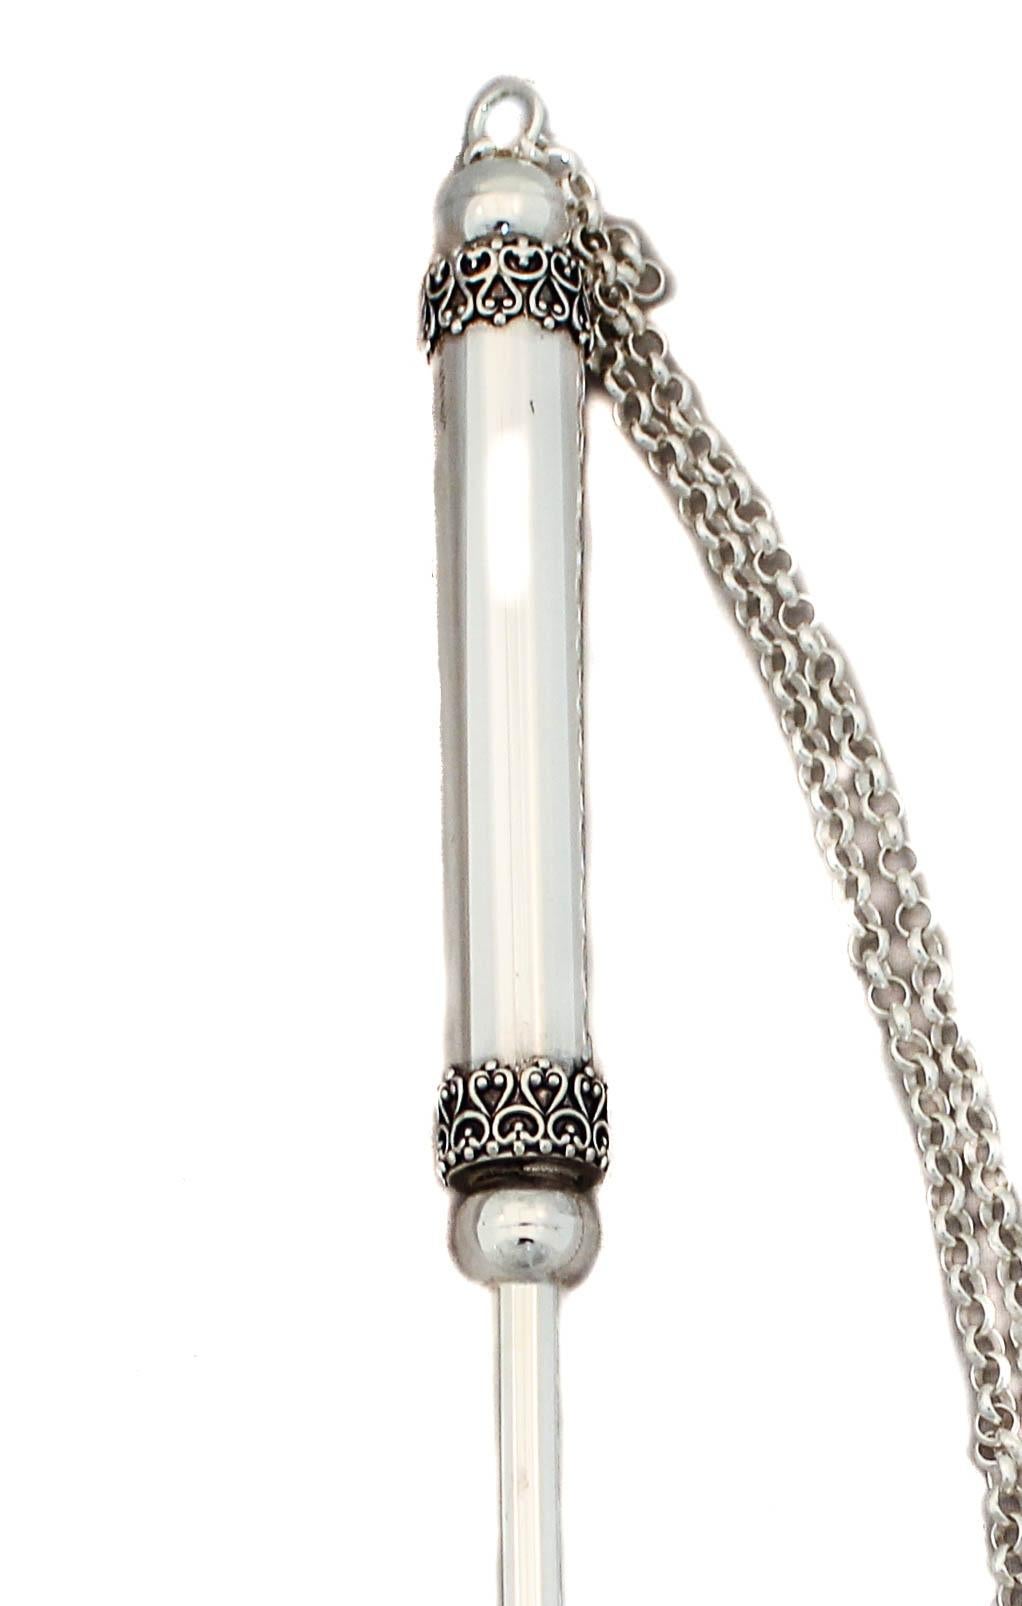 This sterling silver Torah pointer (Yad) from Israel has filigree work around the two ends of the handle and a sterling silver chain on the end to hang on the Torah. The tip has an index finger pointing, making it easier for the reader to follow